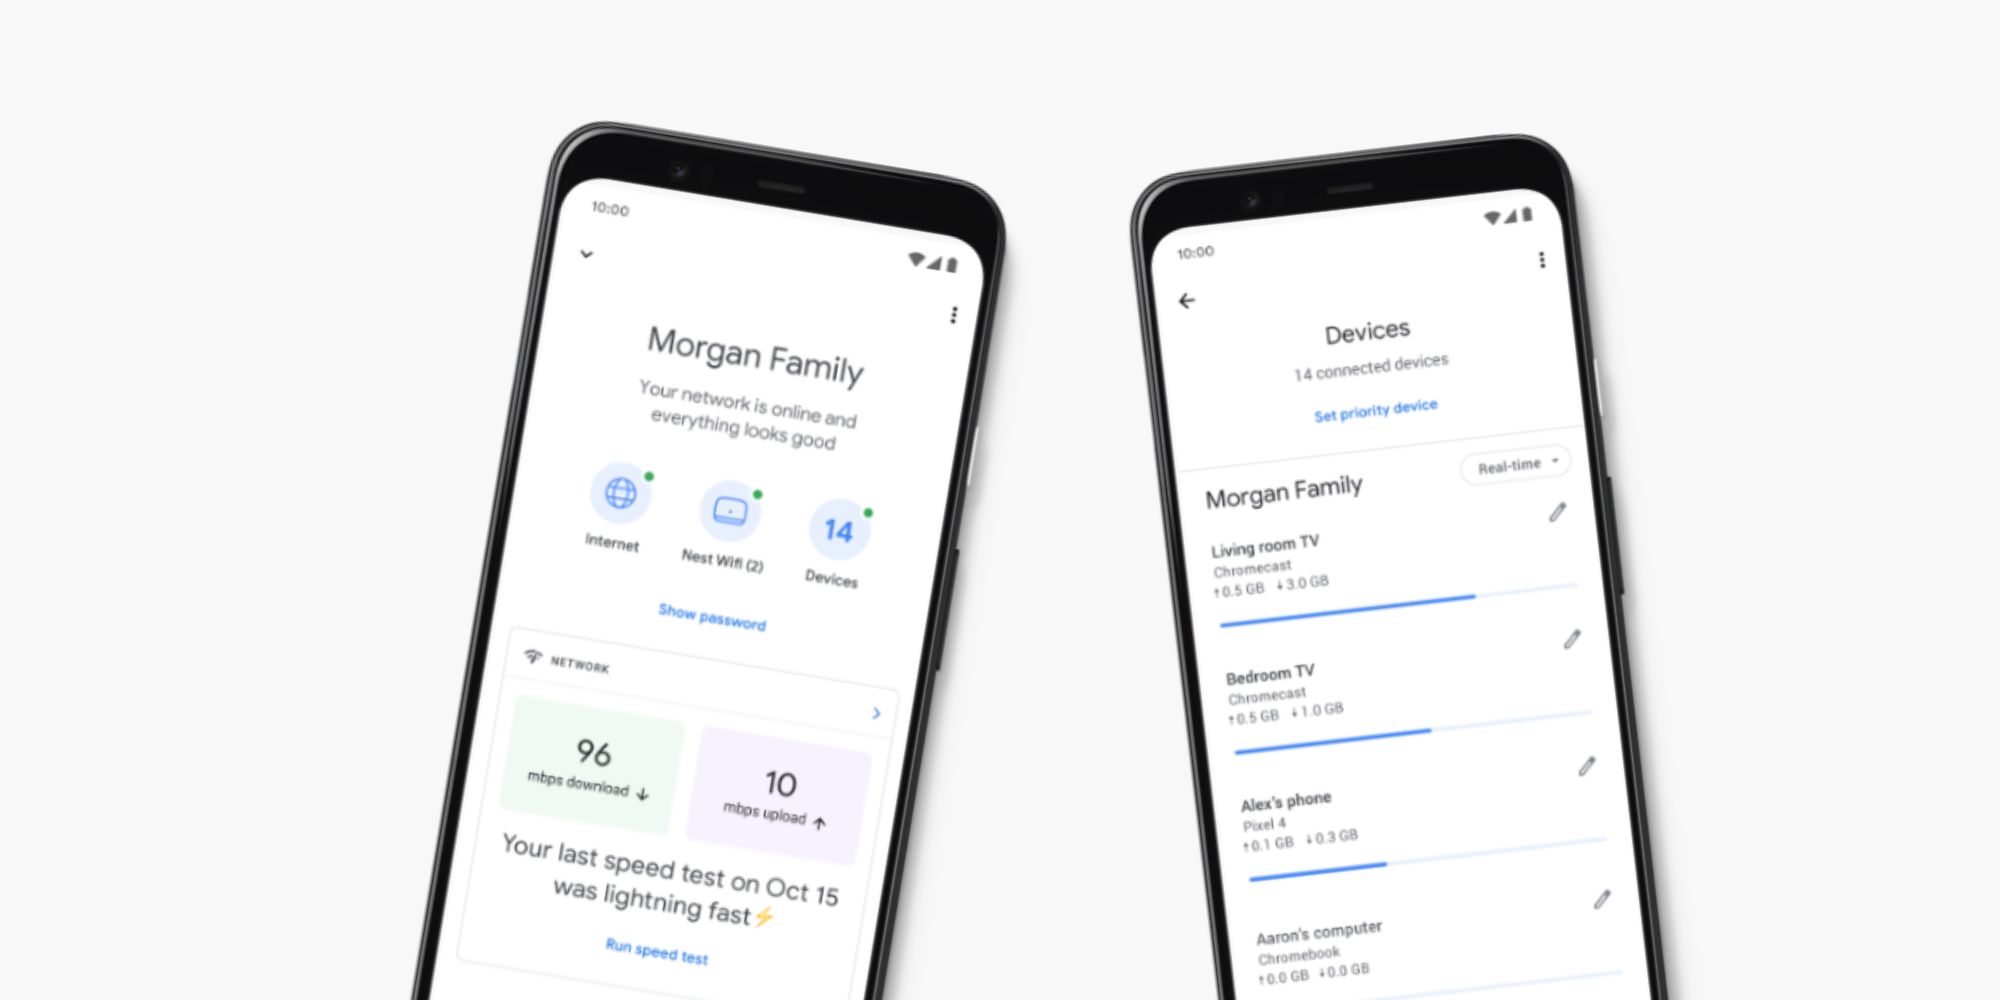 Google Wifi App: When Support Is Ending & What Users Need To Do